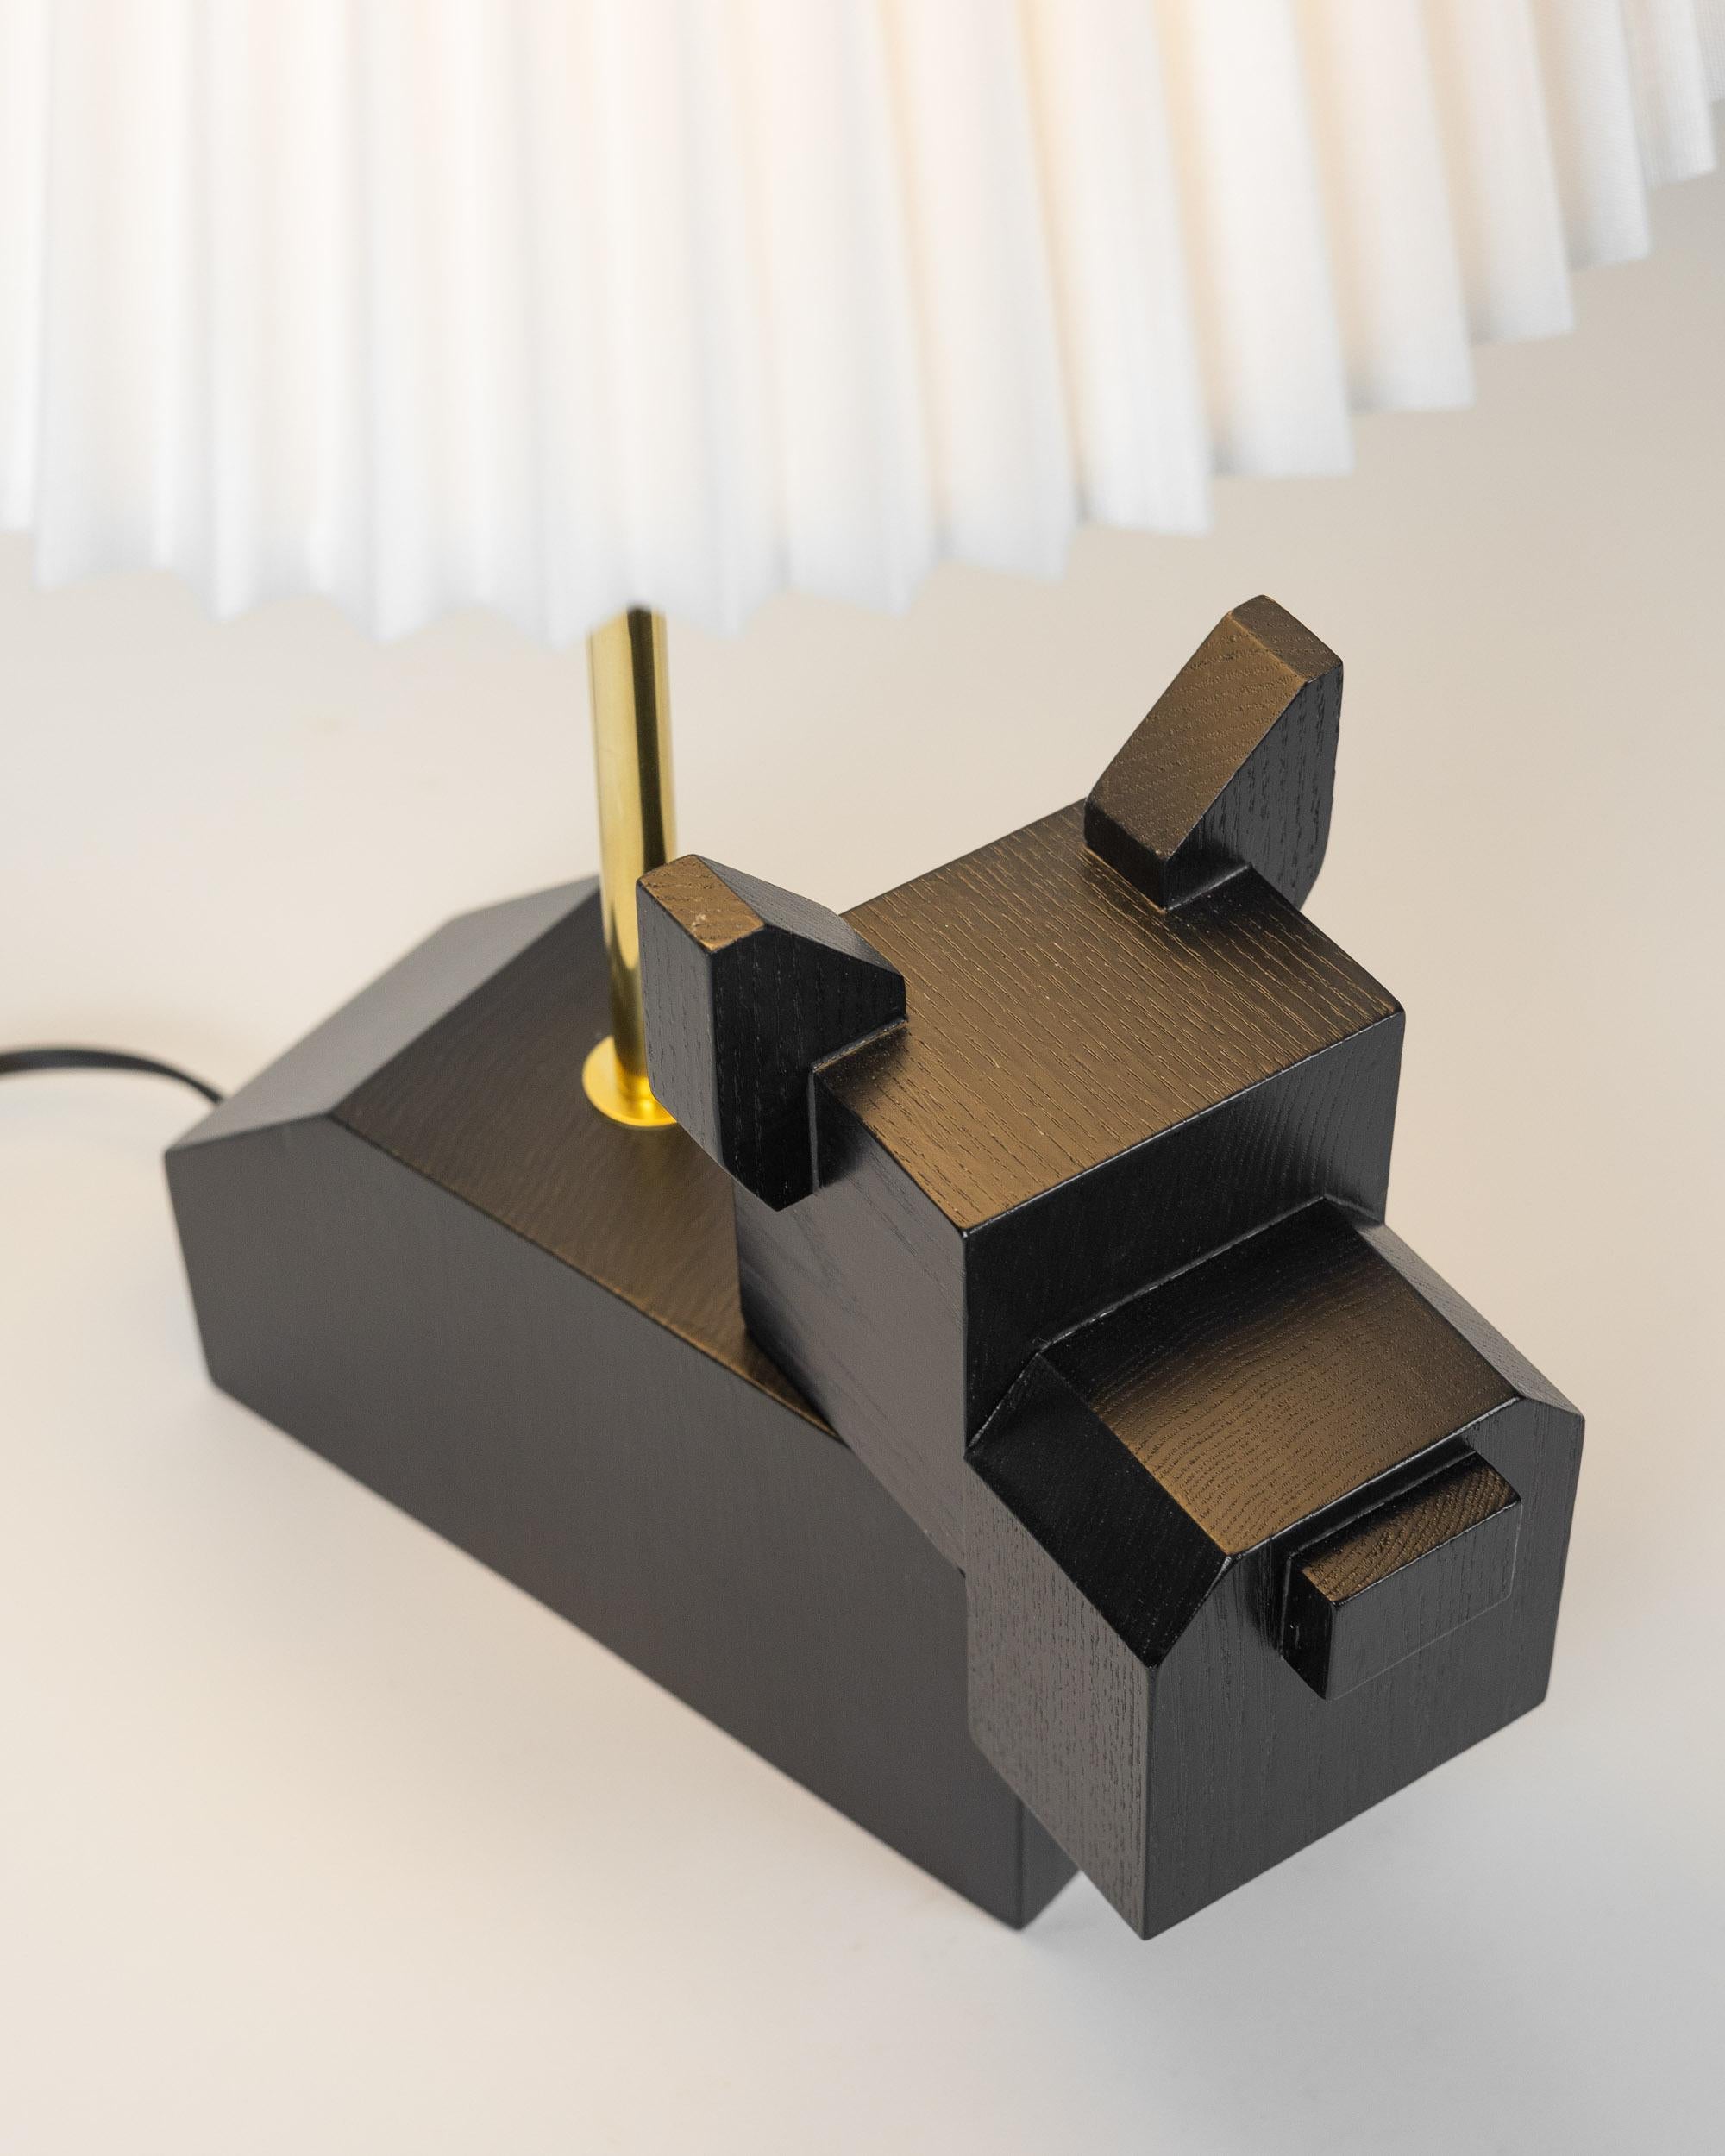 Black Doggy Lamp by Wan Wan Wonderland (Tokyo, Japan)

Delightful and whimsical table lamp with white pleated shades and expertly hand-crafted black wooden base. Each lamp is hand crafted by WAN(of WAN WAN WONDERLAND), an artist and dog lover, at